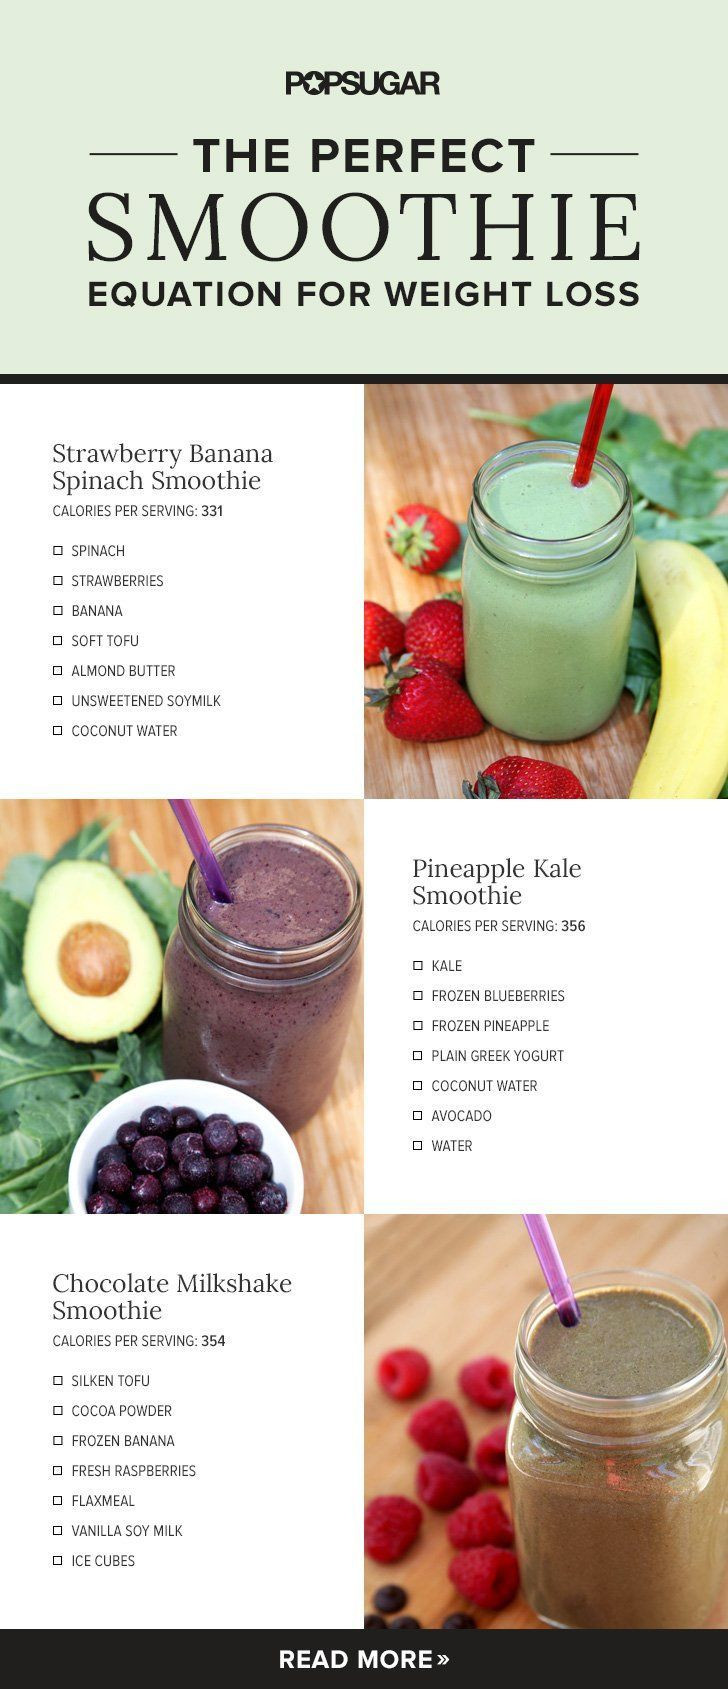 Healthy Smoothies For Breakfast
 If You Want to Lose Weight This Is the Smoothie Formula